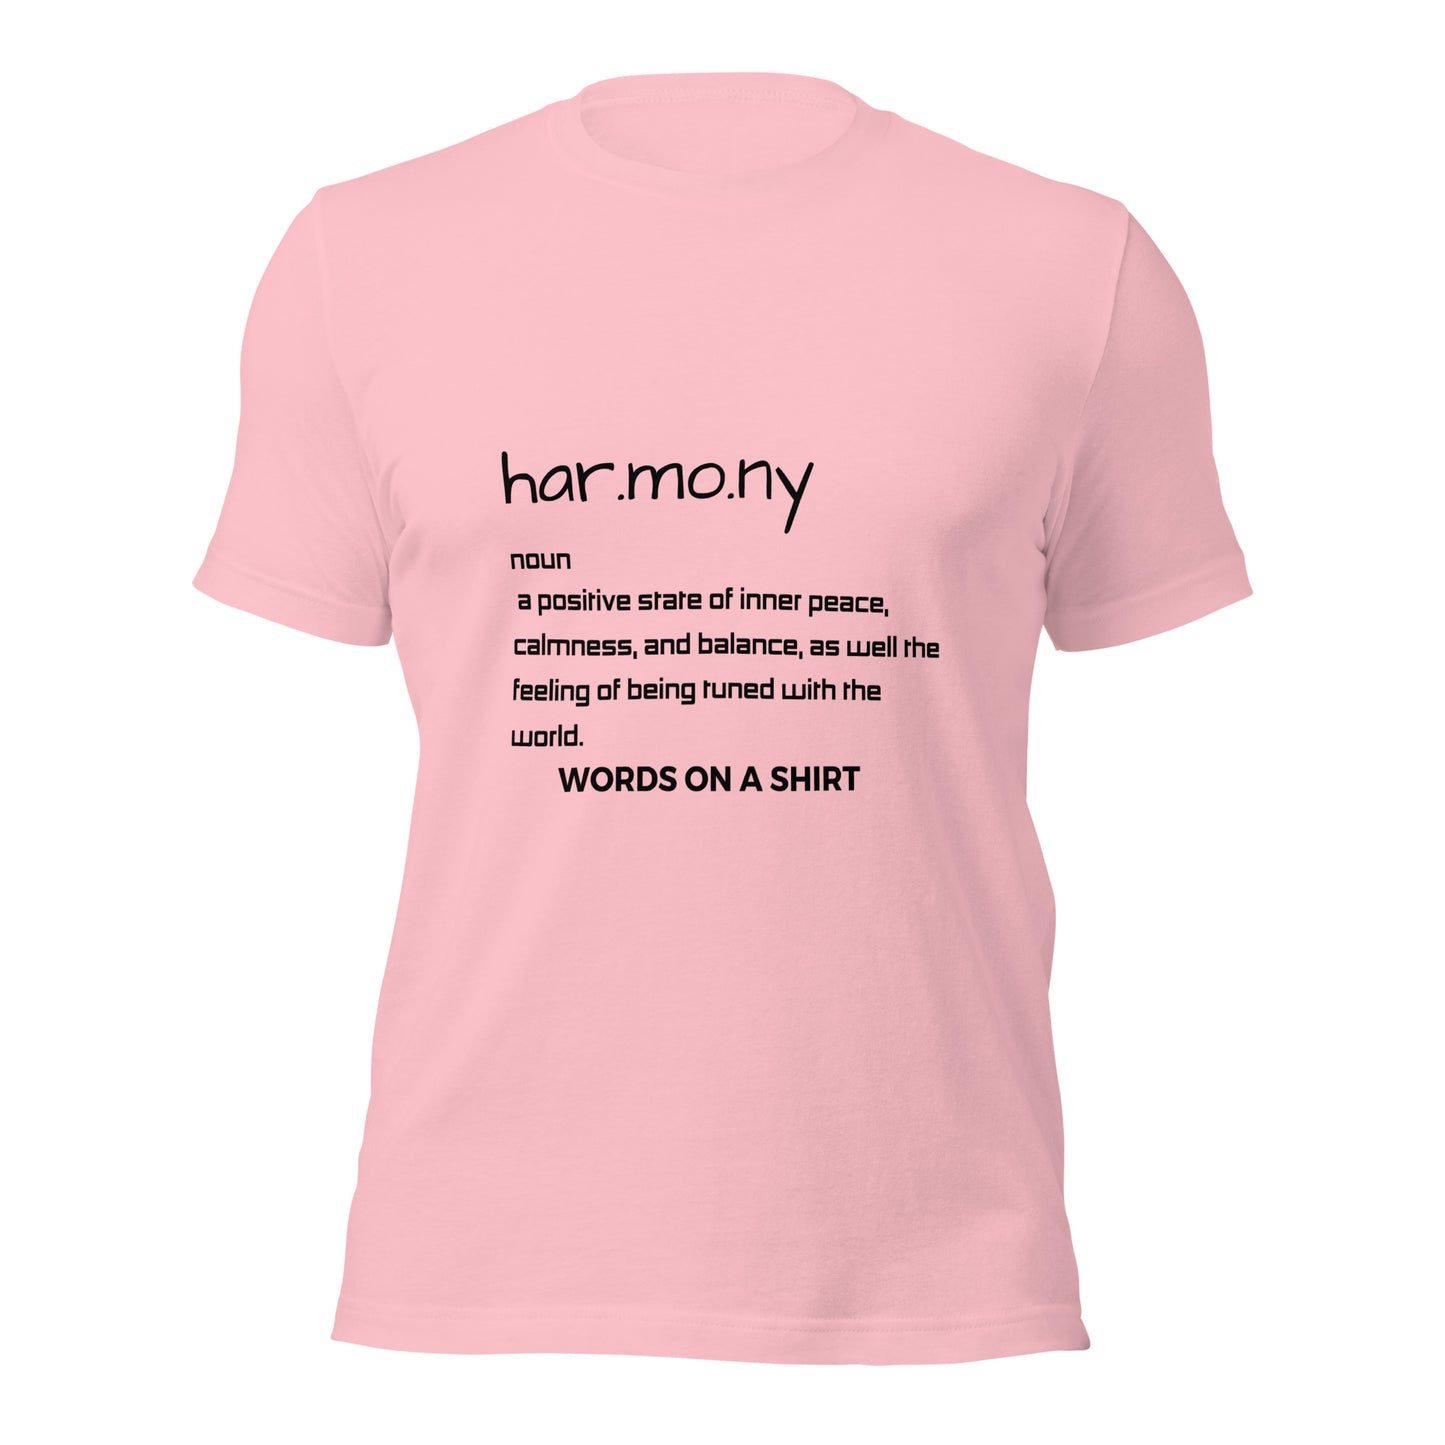 Enjoy the flawless fit and feel of Harmony Defined Unisex T-Shirt! With pre-shrunk fabric, side-seamed construction, and unparalleled comfort, you won't want to miss out. Claim yours now!